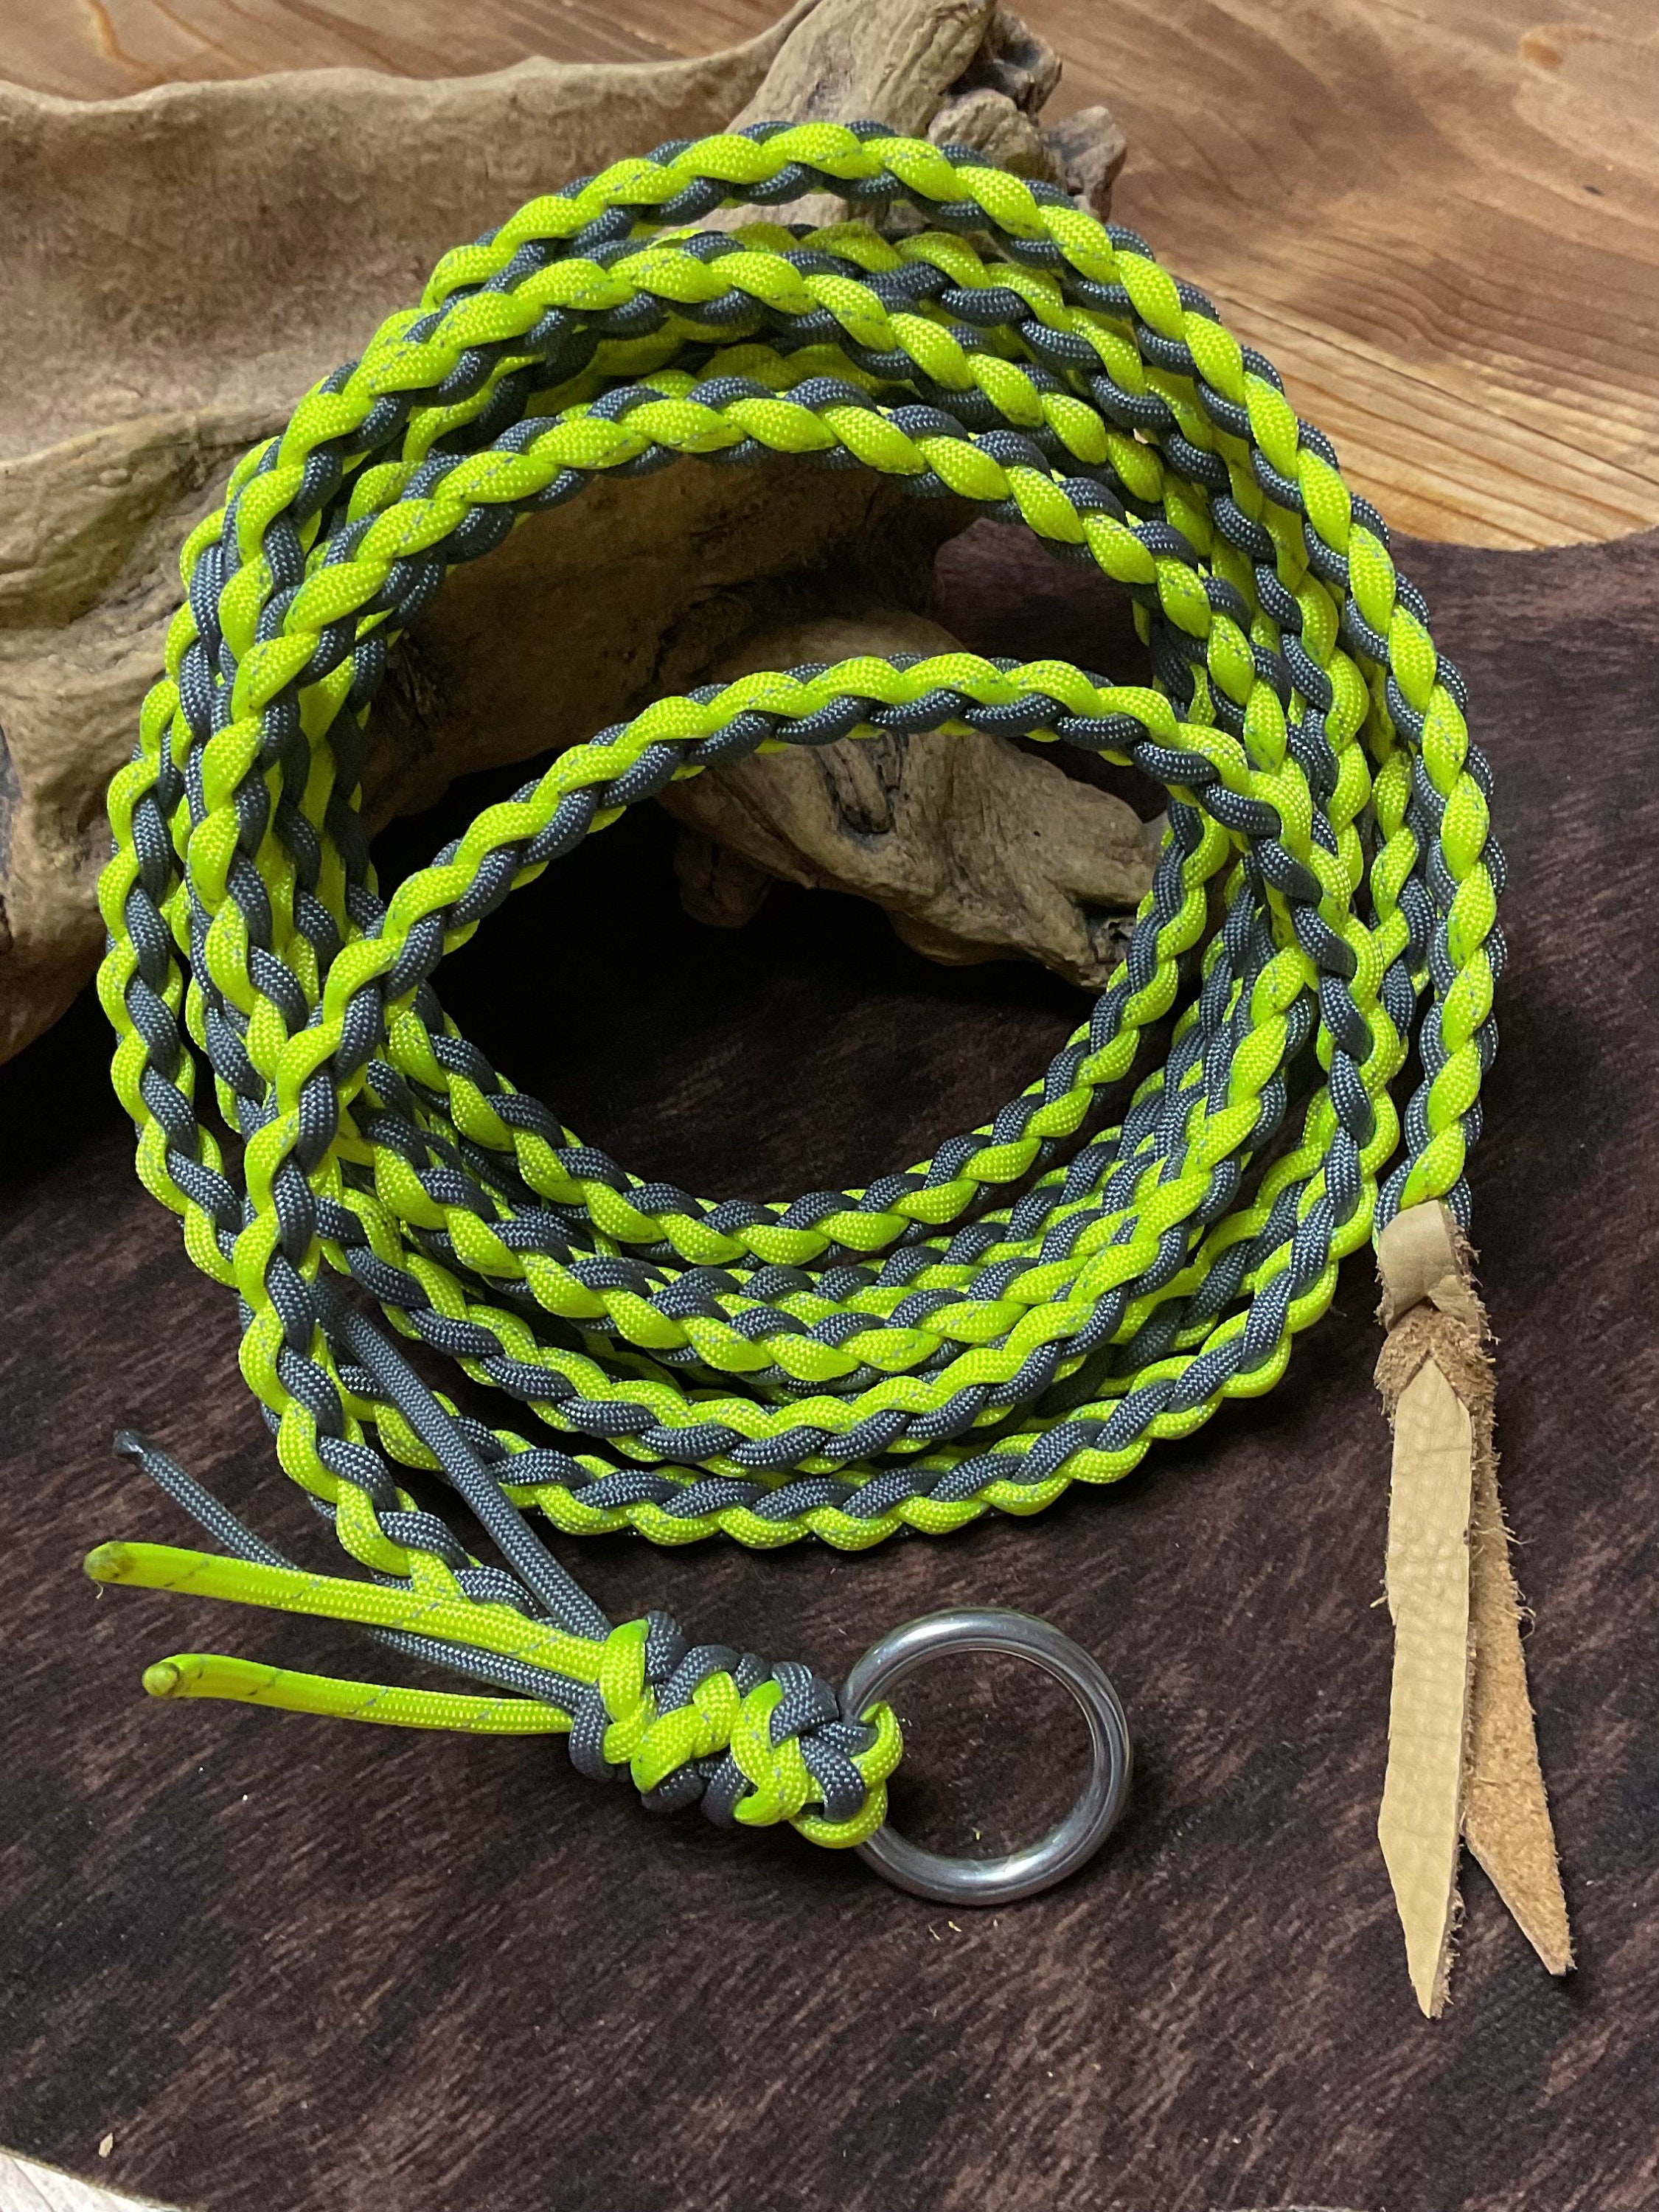 Paracord Piggin' String, Cattle Tie-down Rope, Woven Loop, 3-10 Ft